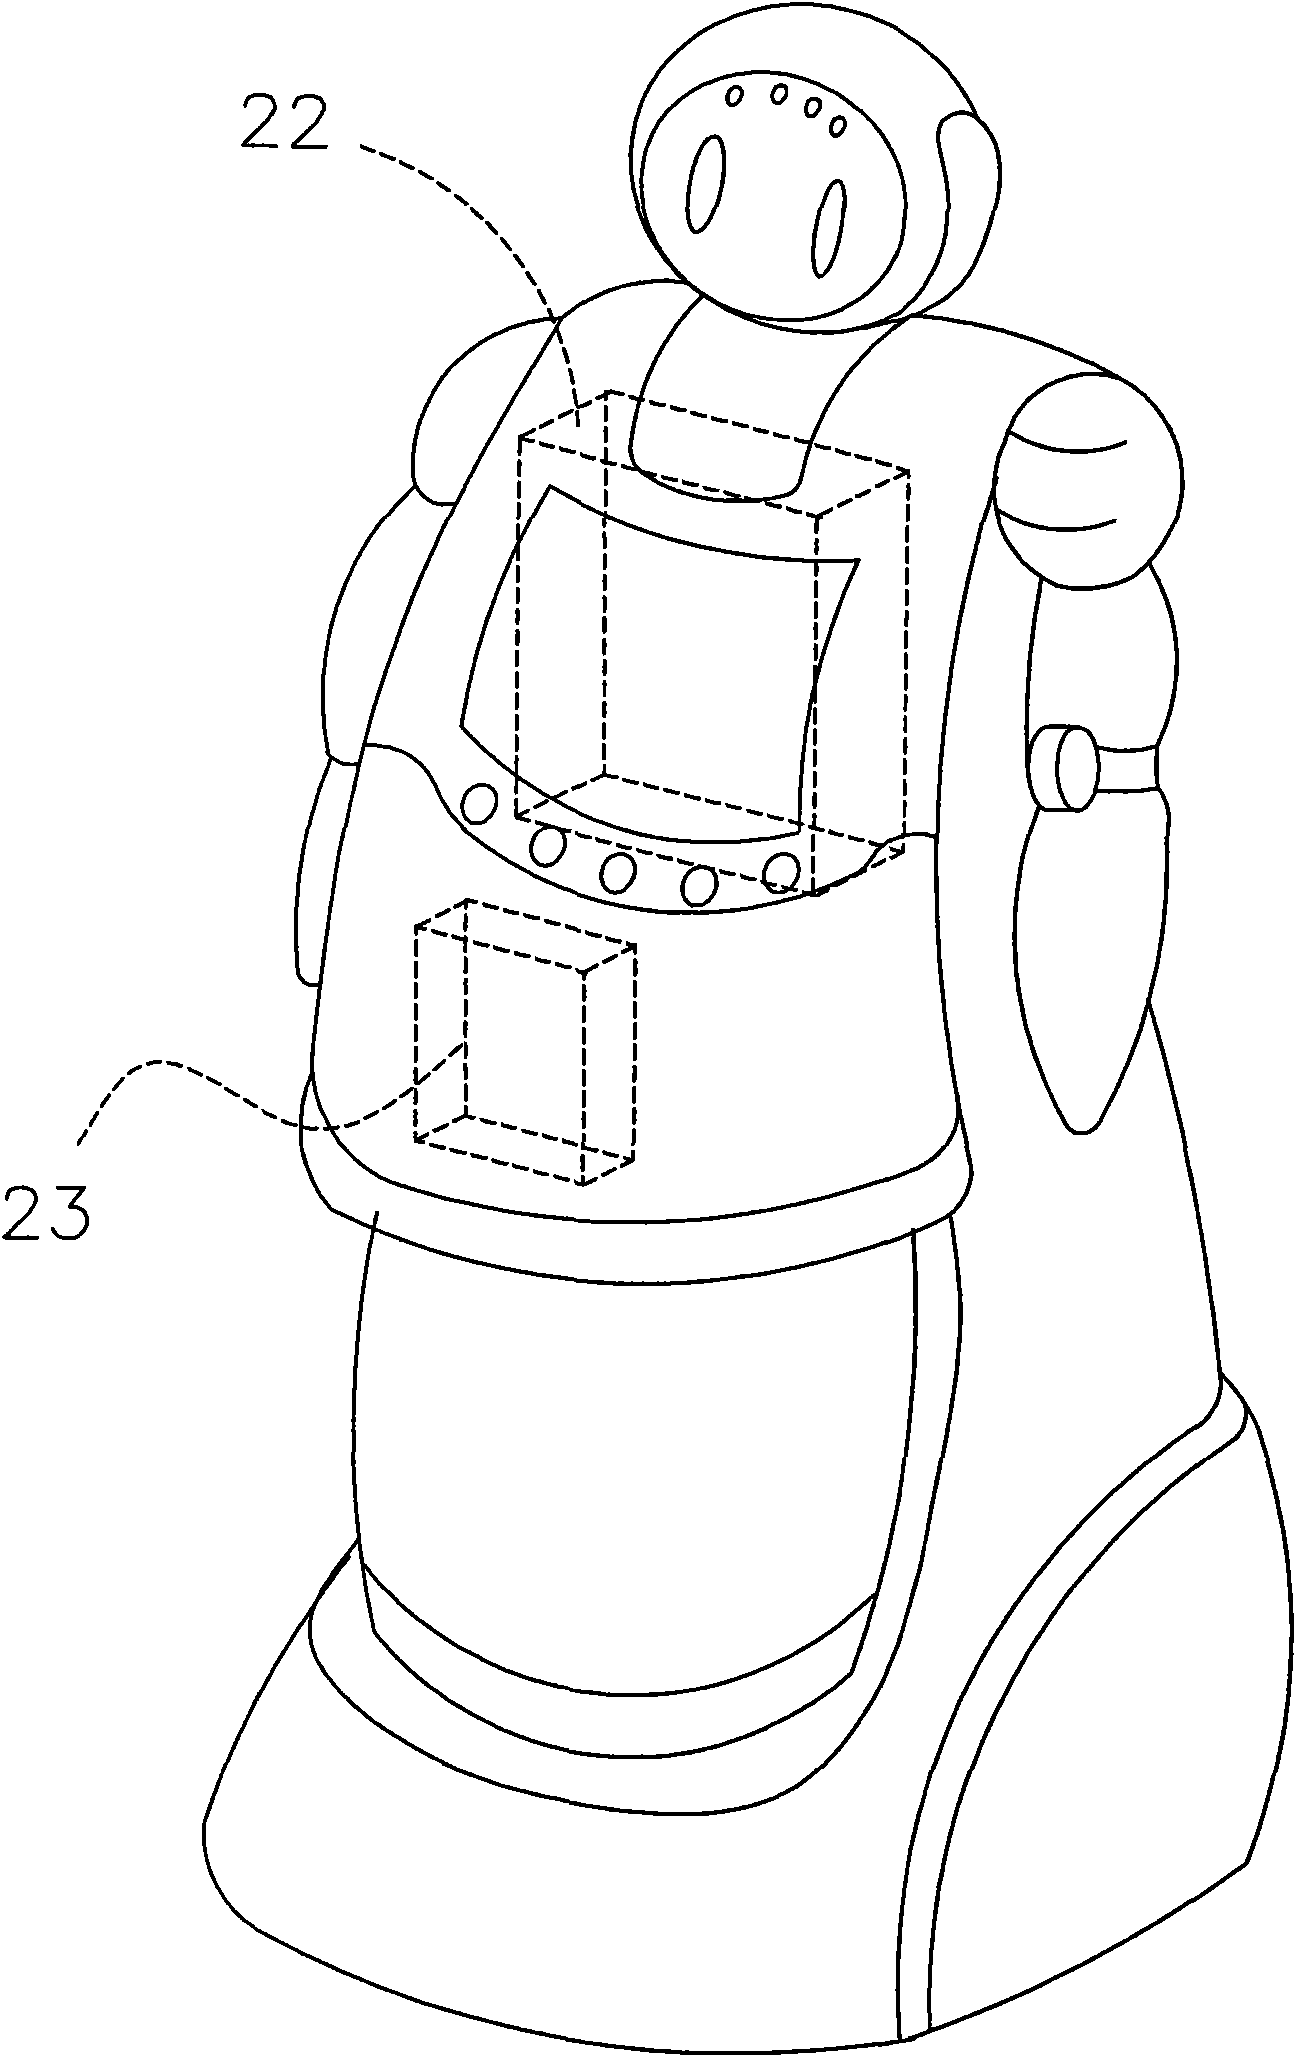 Device capable of at least providing negative ions or moving along with music